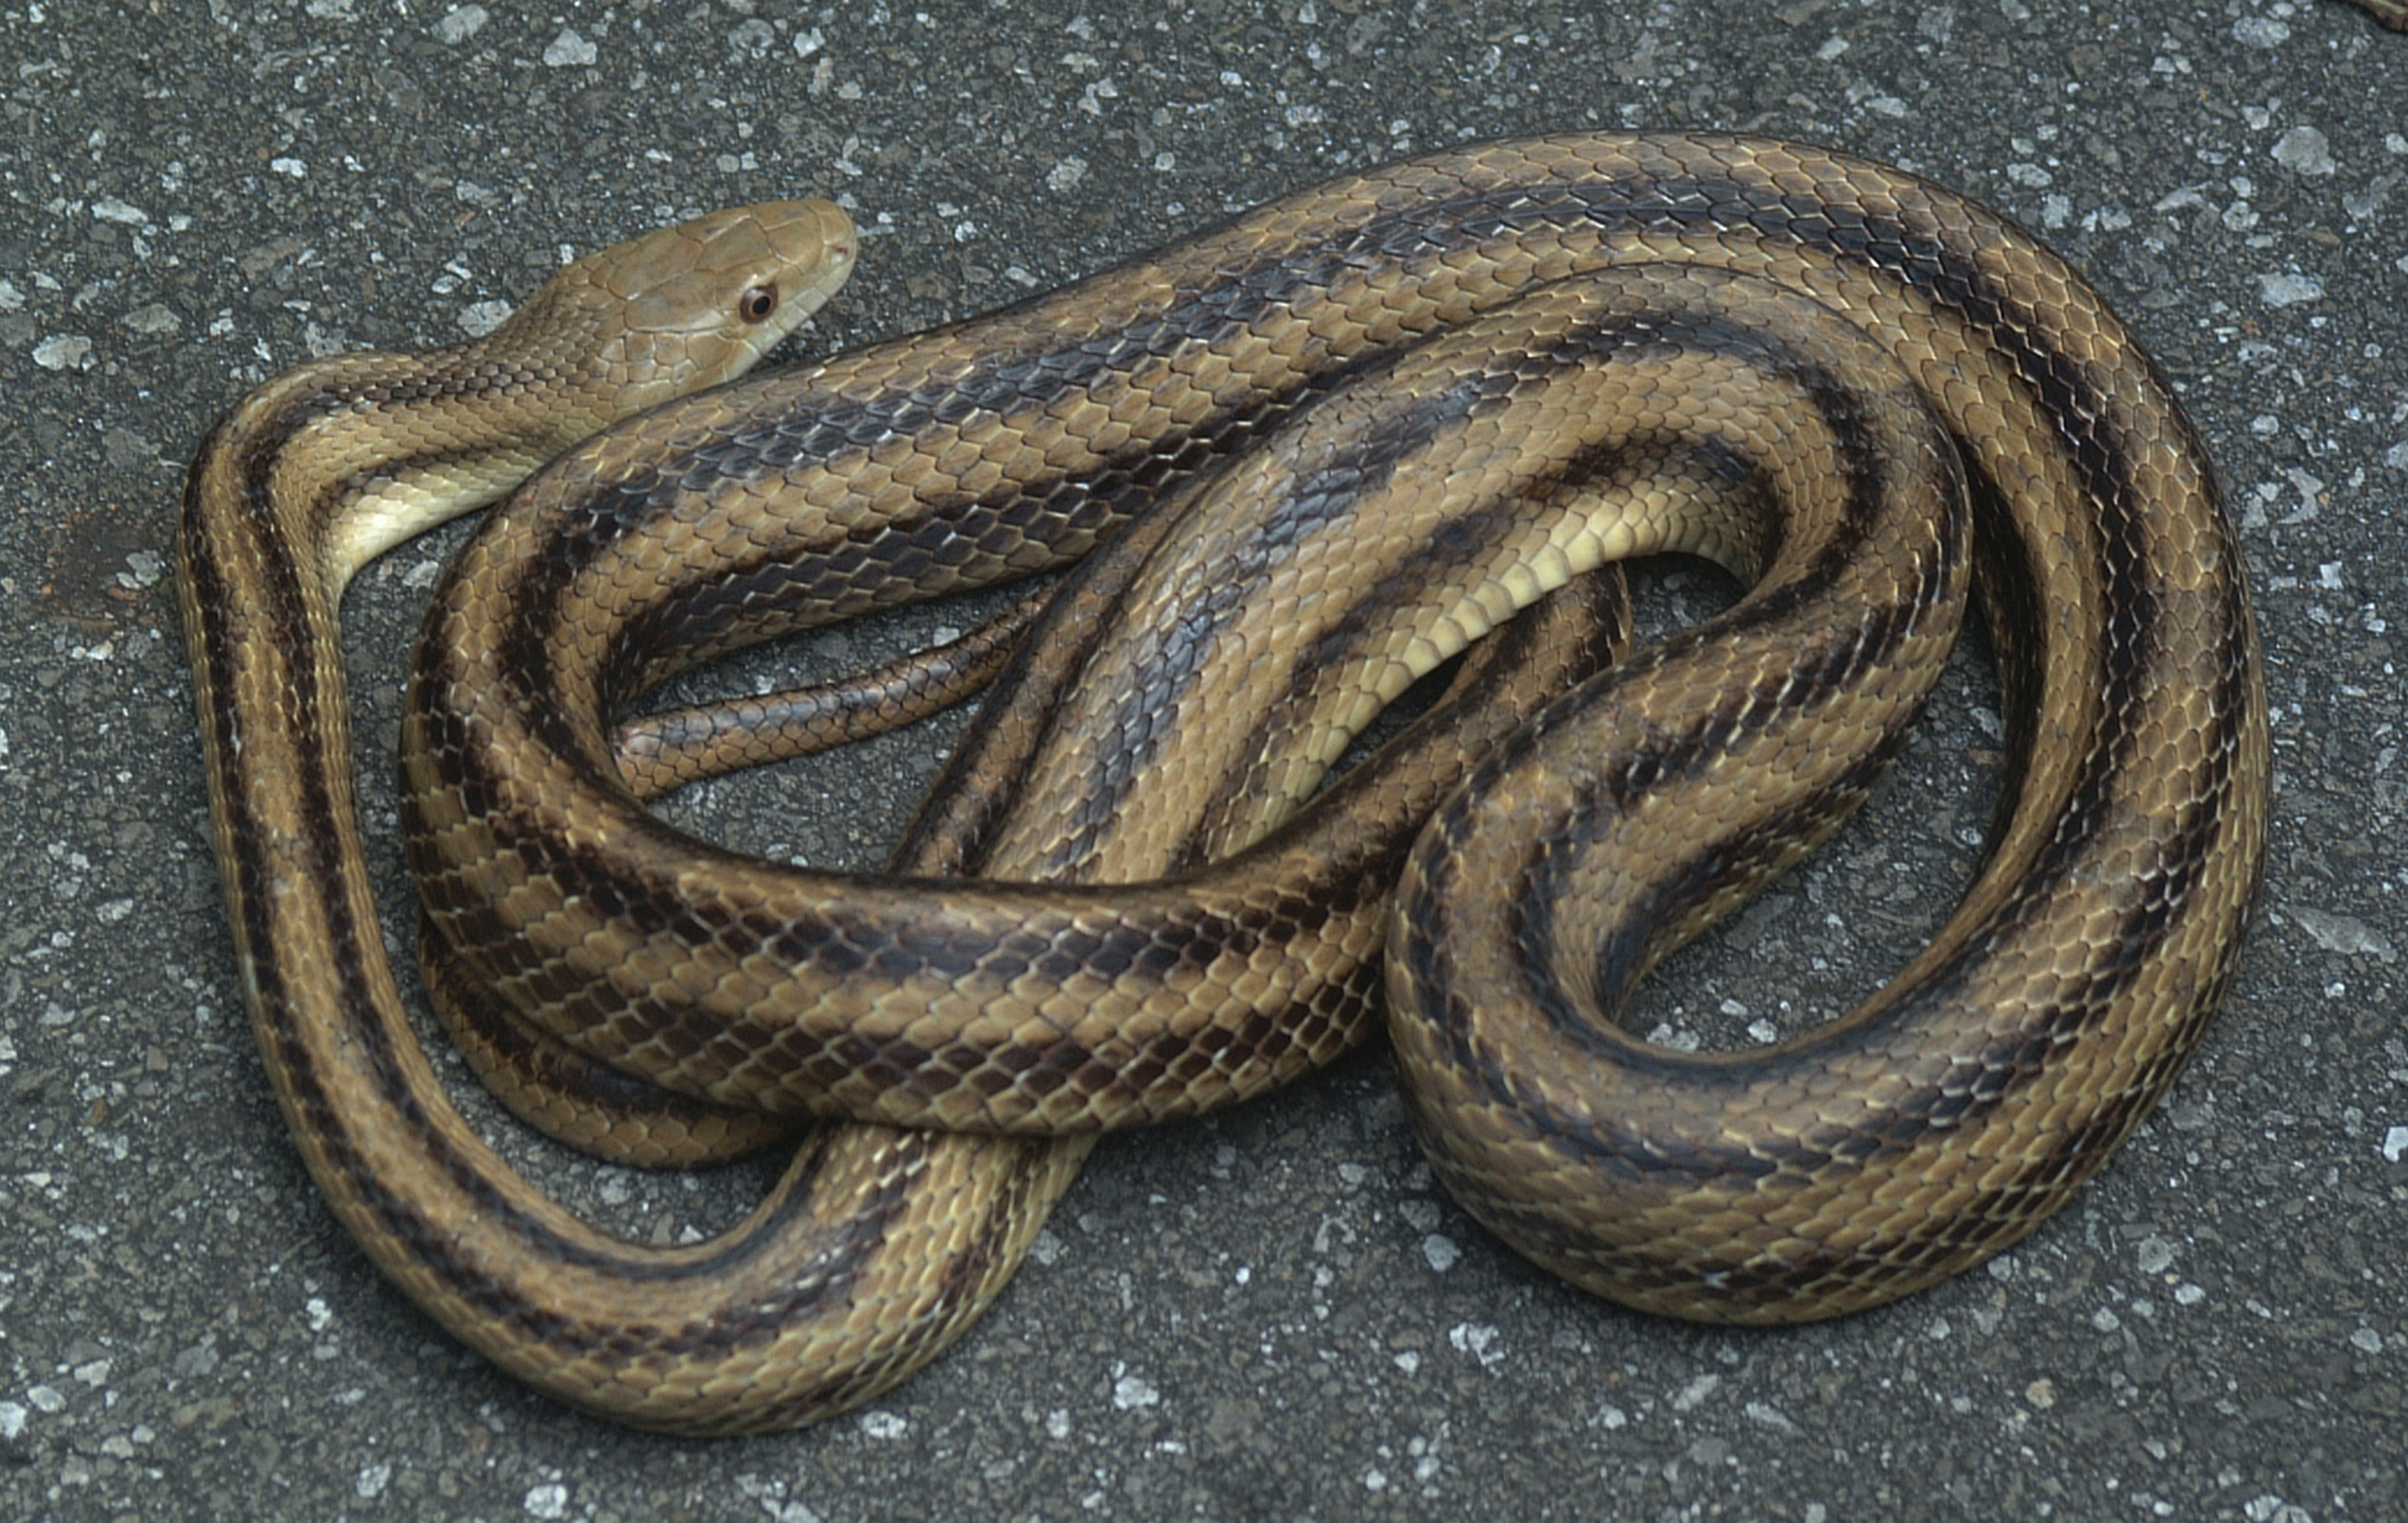 A yellow rat snake on what appears to be an asphalt road. 